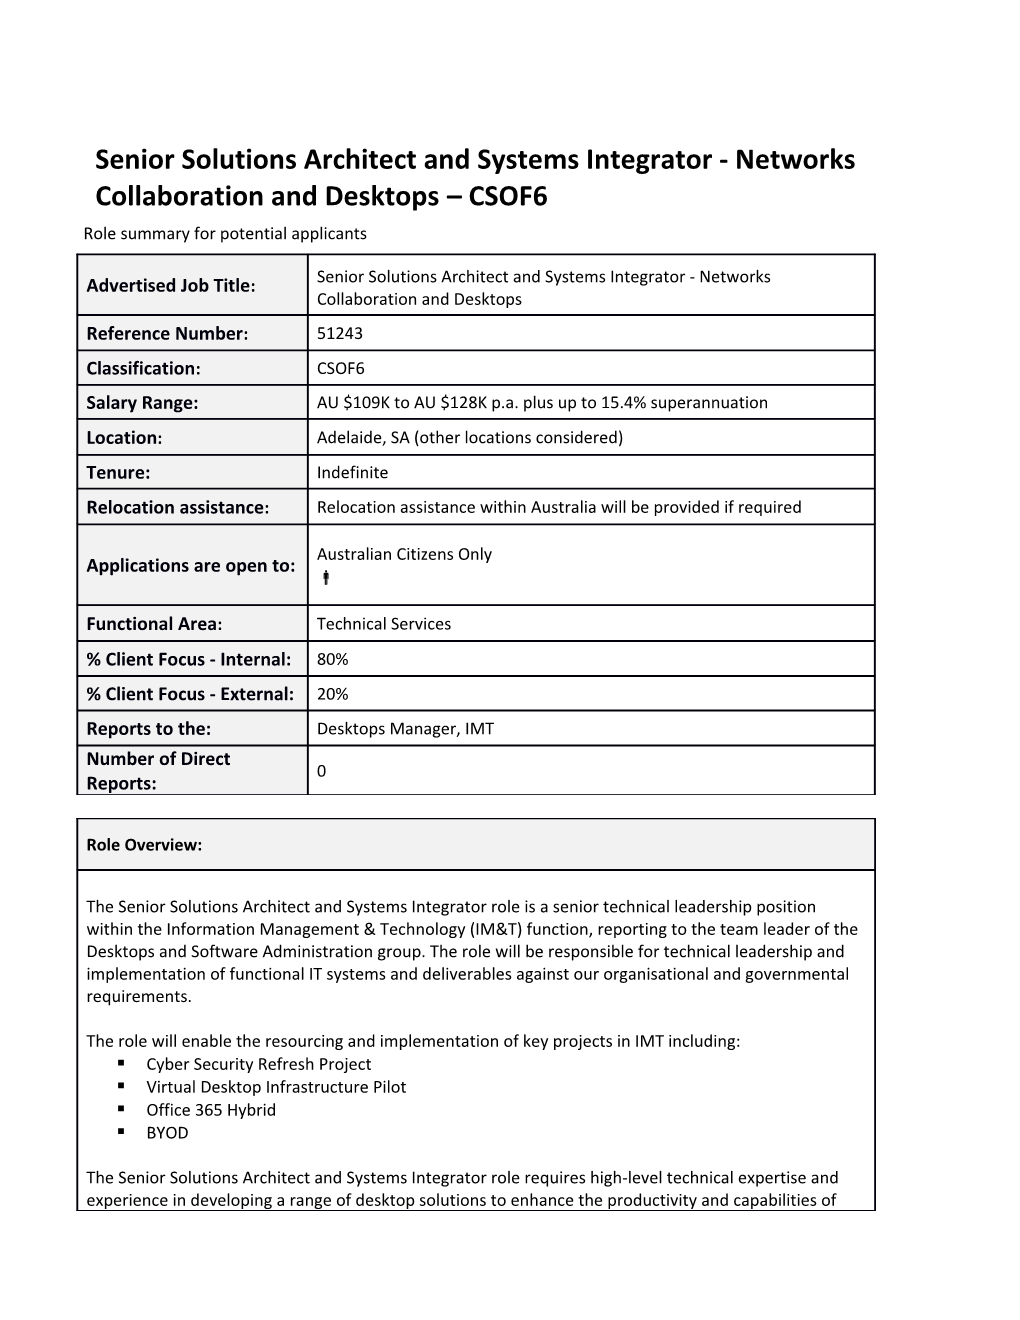 Senior Solutions Architect and Systems Integrator - Networks Collaboration and Desktops CSOF6